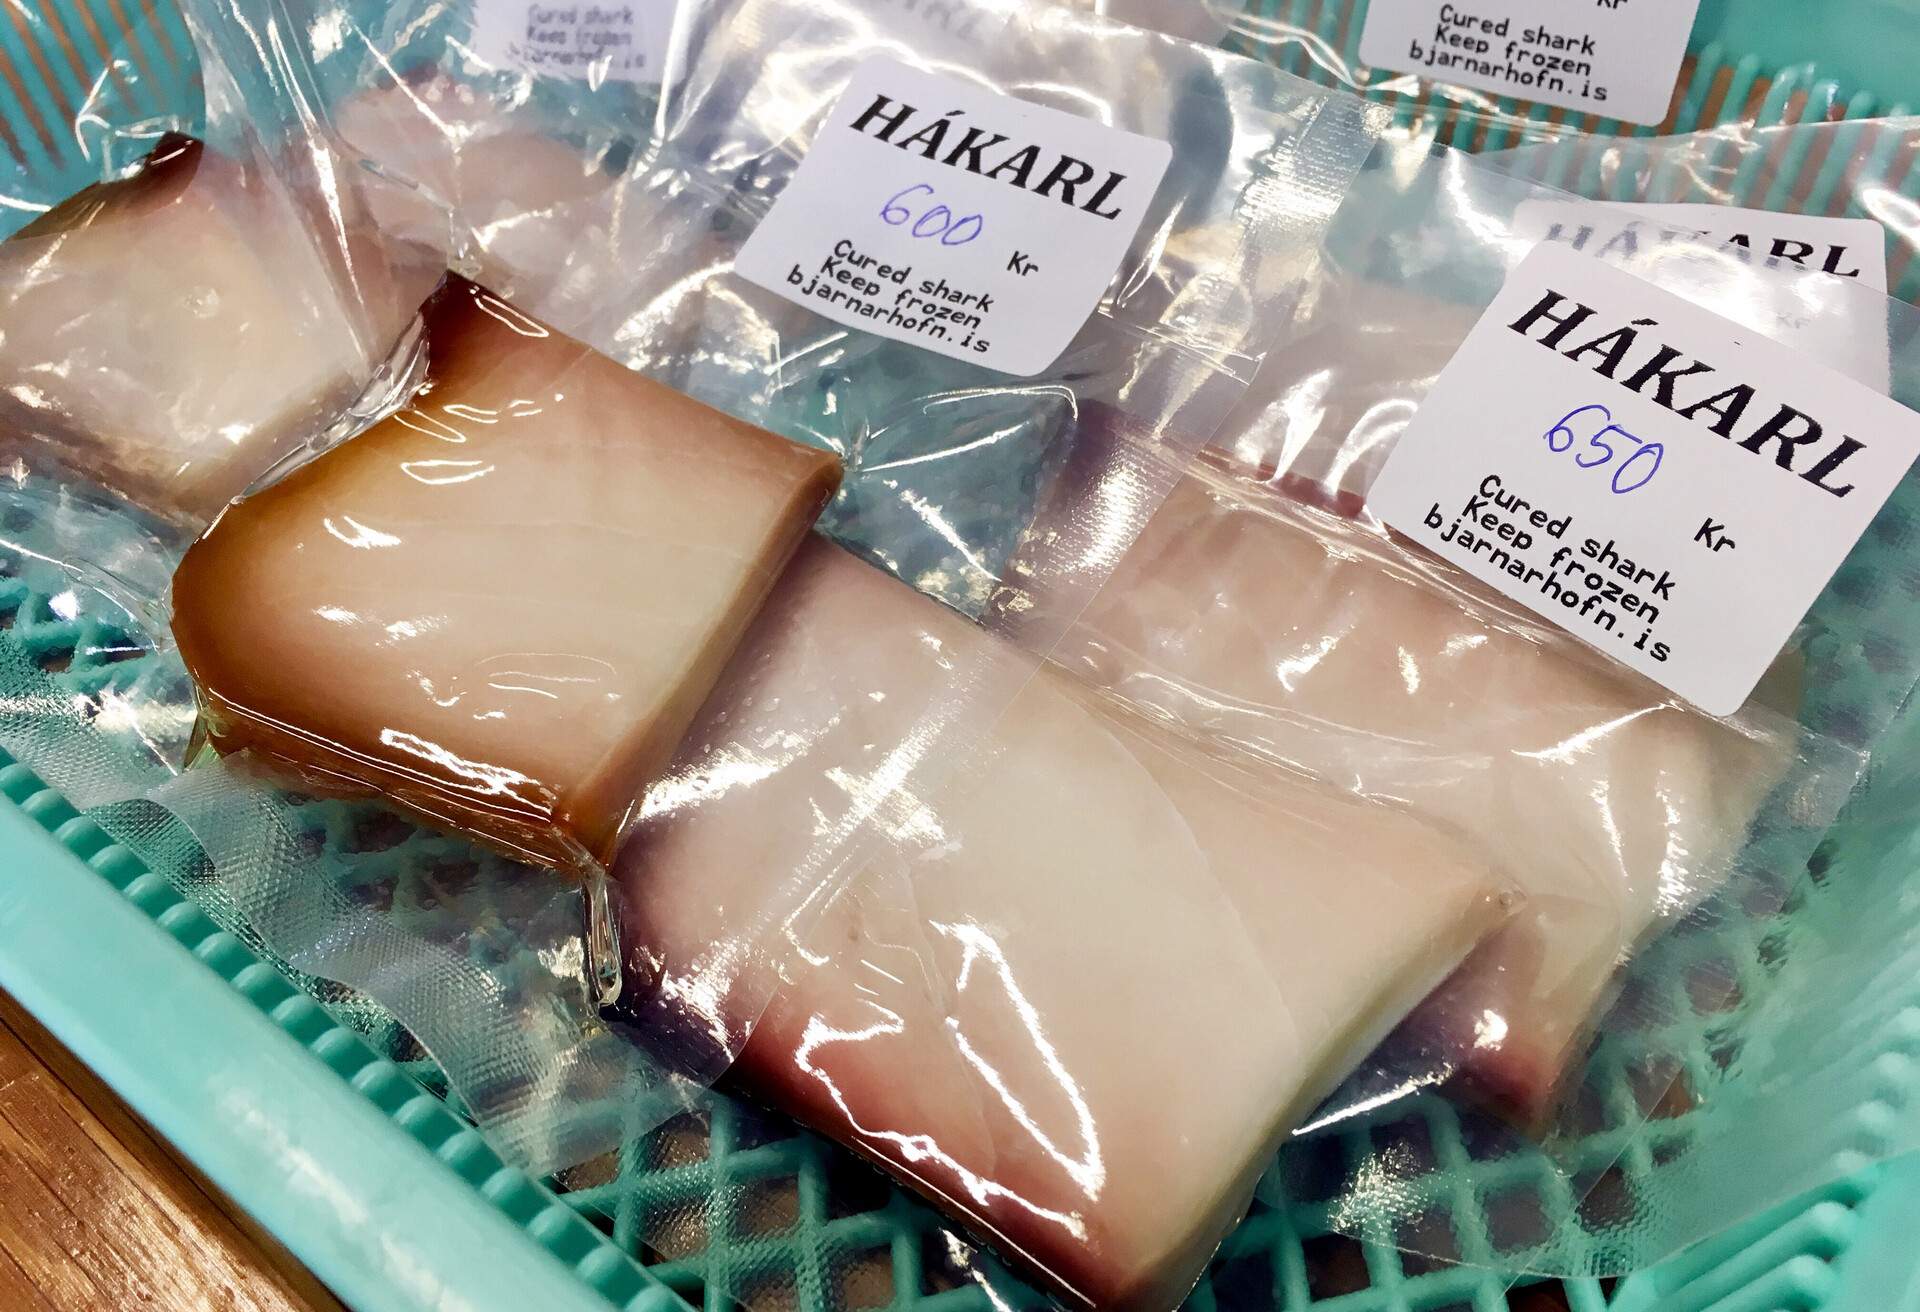 Packaged hákarl, fermented Greenland shark, for sale in a store in Iceland. The meat of the Greenland shark is poisonous when fresh, but after curing, fermenting and drying for four to five months, it becomes edible. The finished product is usually served in small cubes an is renowned for its extreme odor and taste of ammonia.